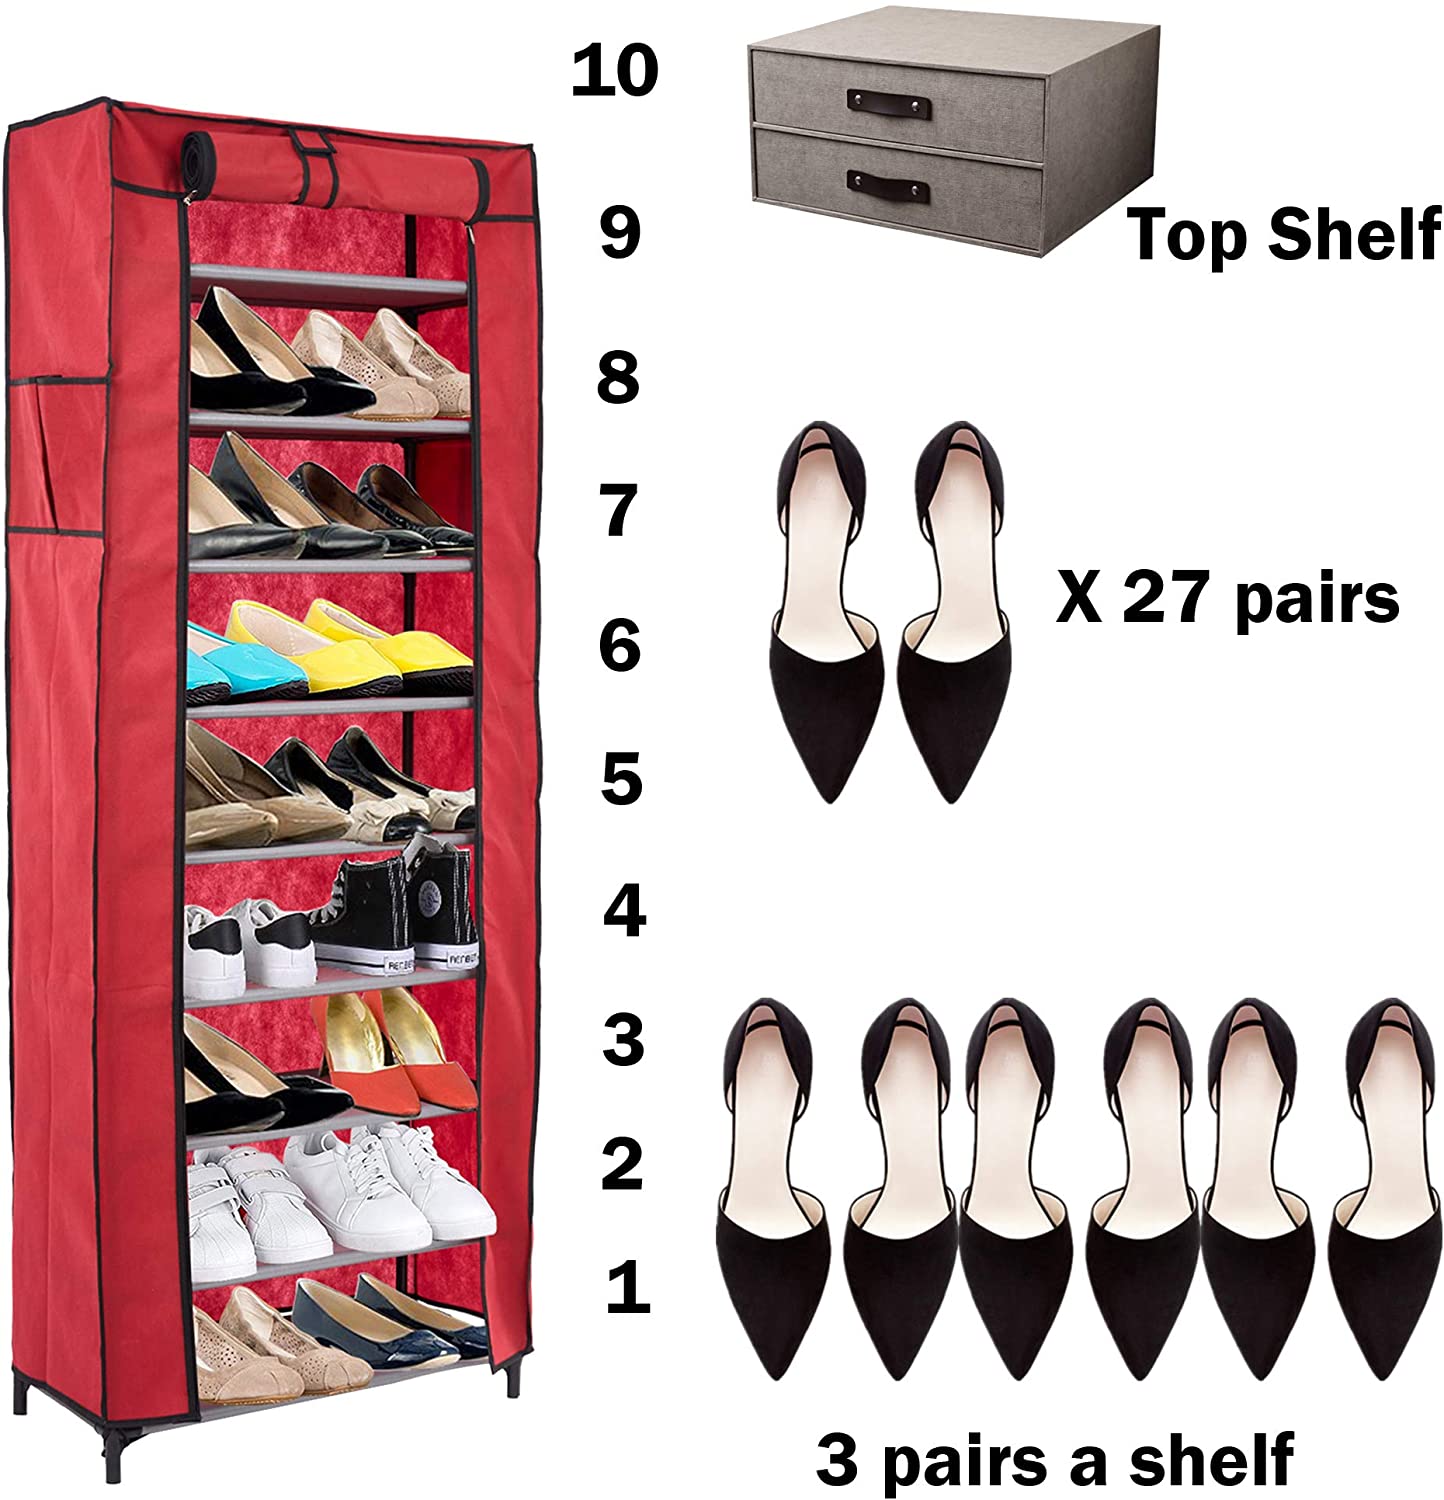 LUCKYERMORE 10 Tiers Shoe Rack with Dustproof Cover Shoes Storage Cabinet Boot Organizer, Red